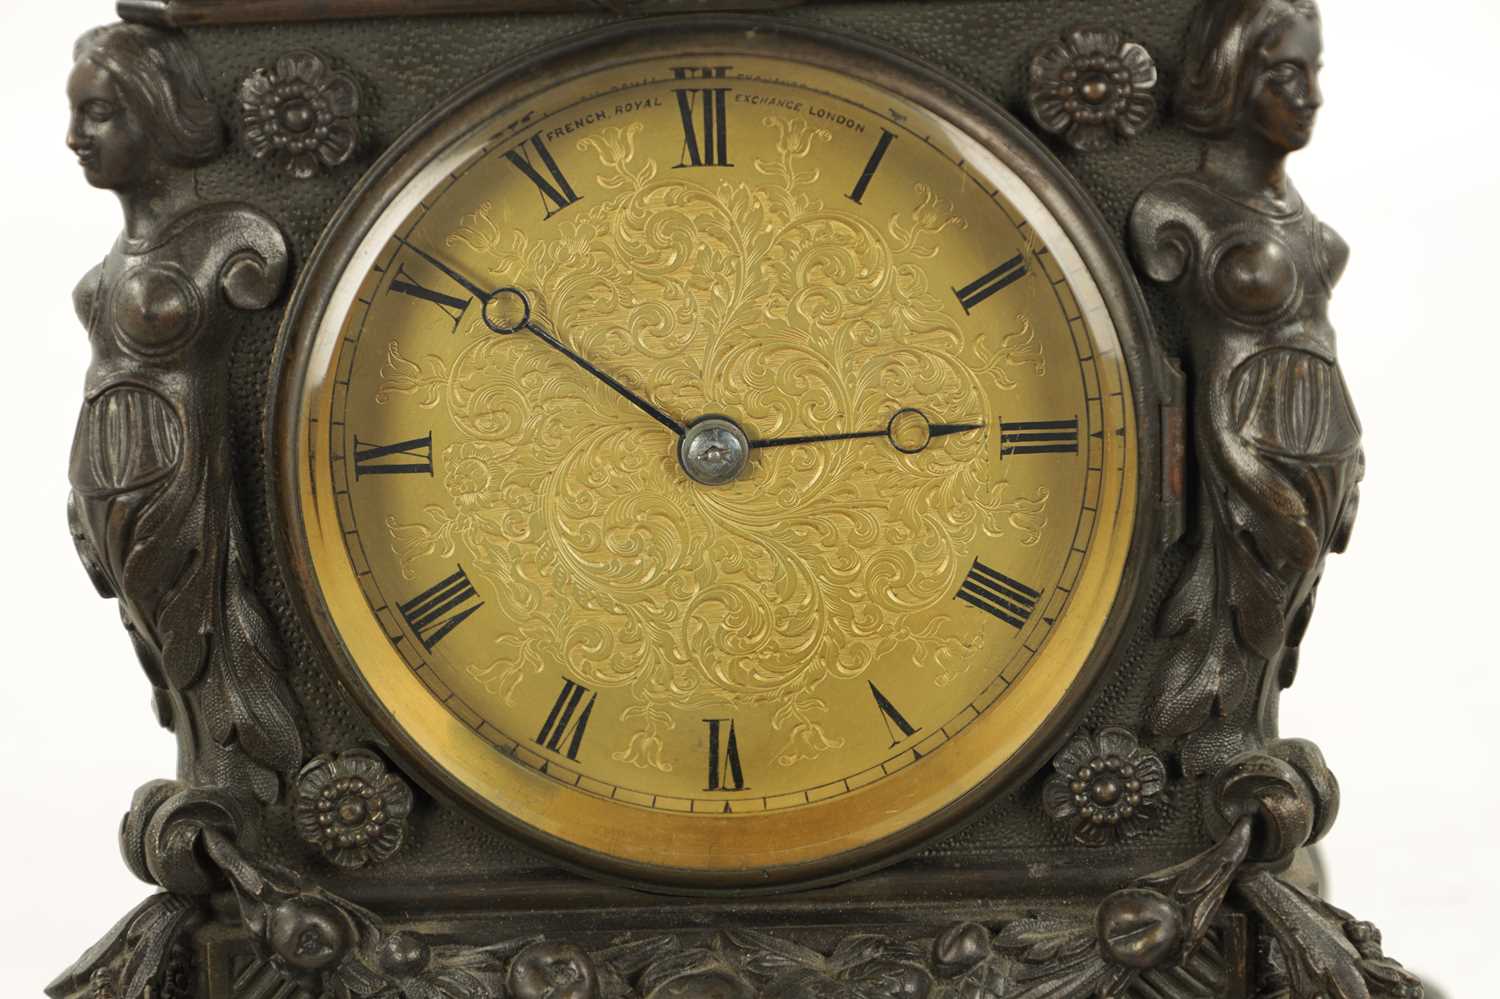 FRENCH, ROYAL EXCHANGE, LONDON. A MID 19TH CENTURY DOUBLE FUSEE REPEATING GIANT CARRIAGE CLOCK - Image 3 of 12